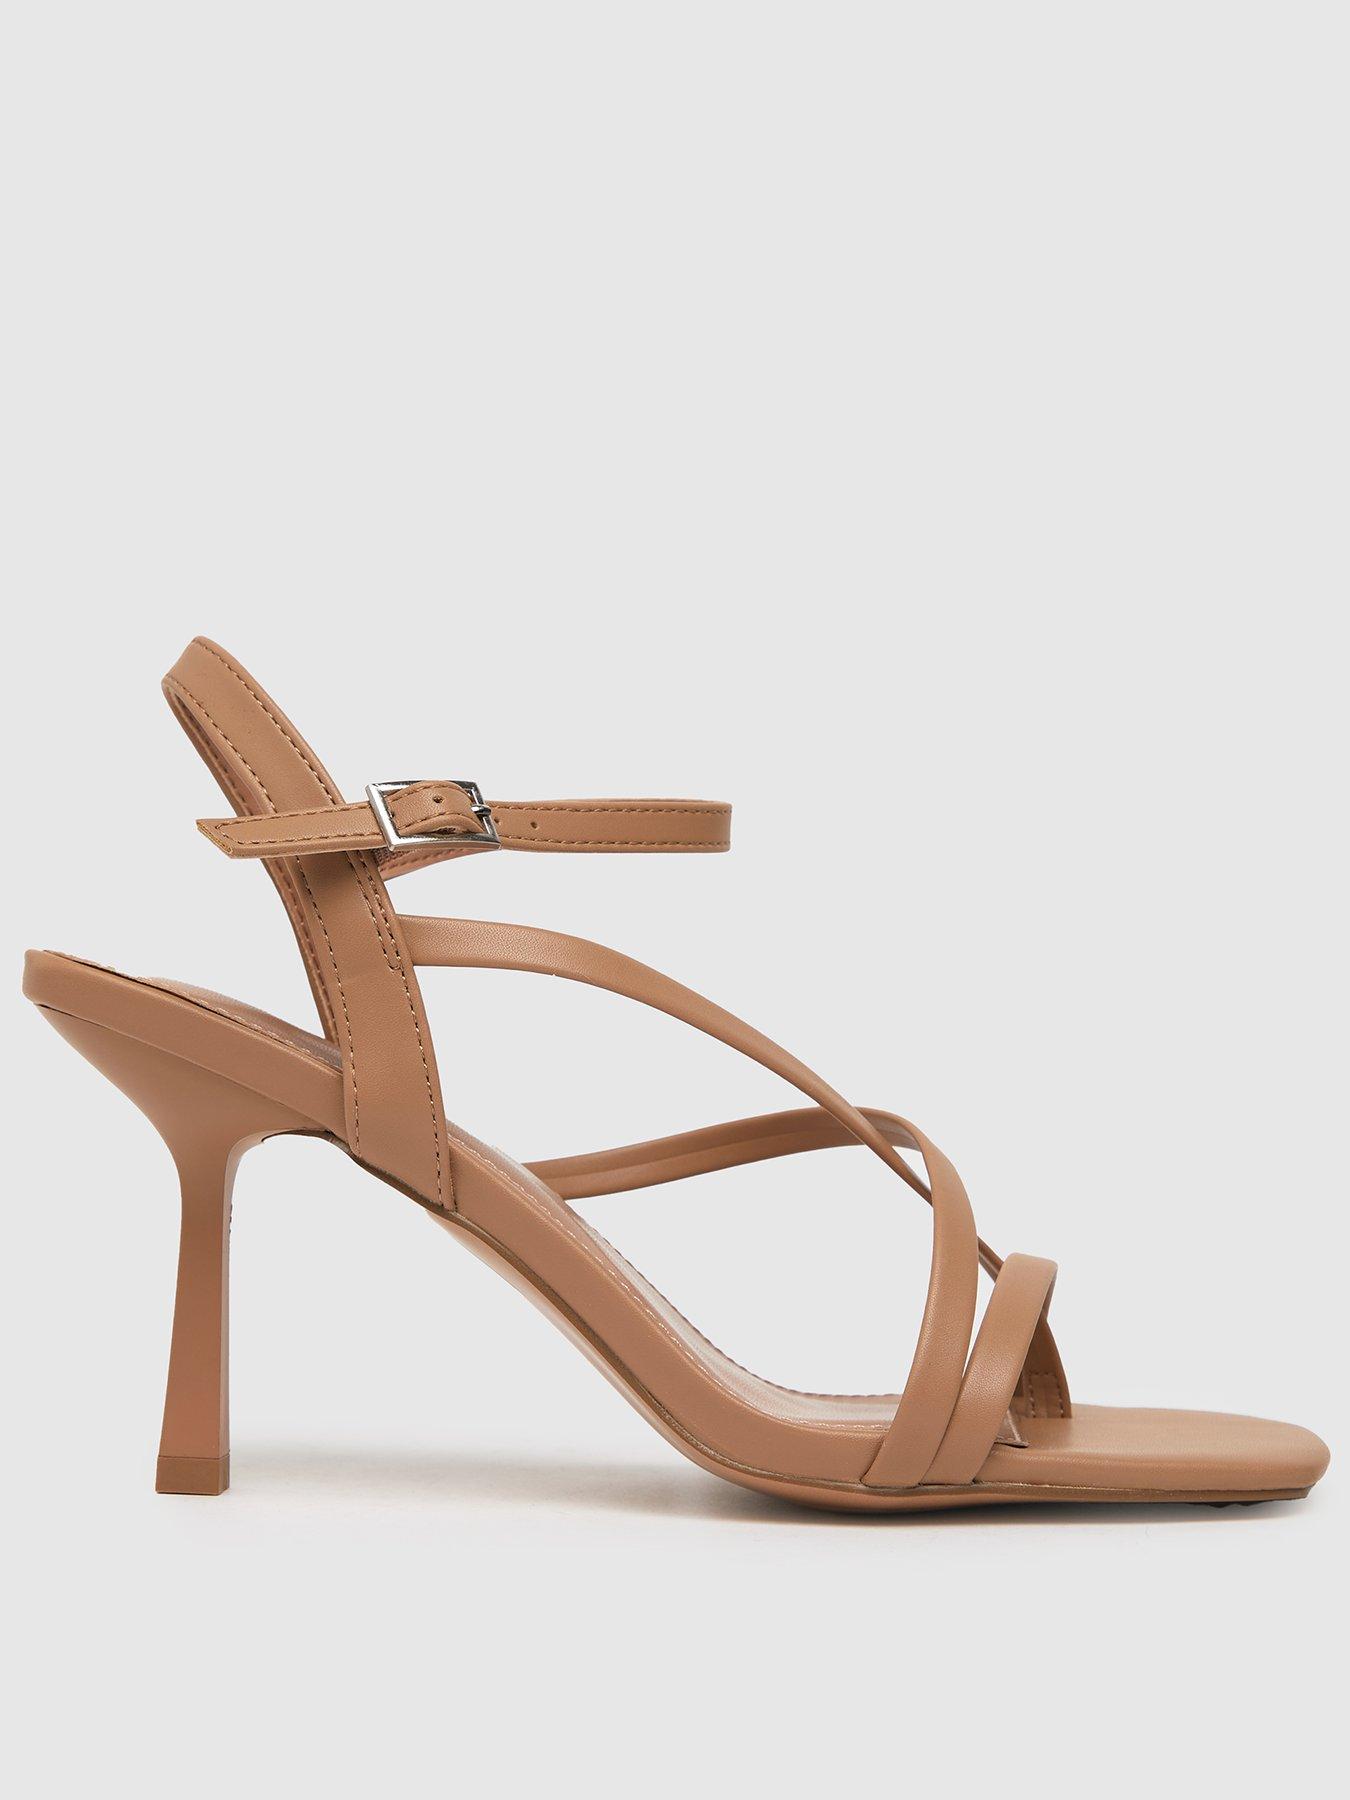 Shoes & boots Sania Strippy Heel - Natural